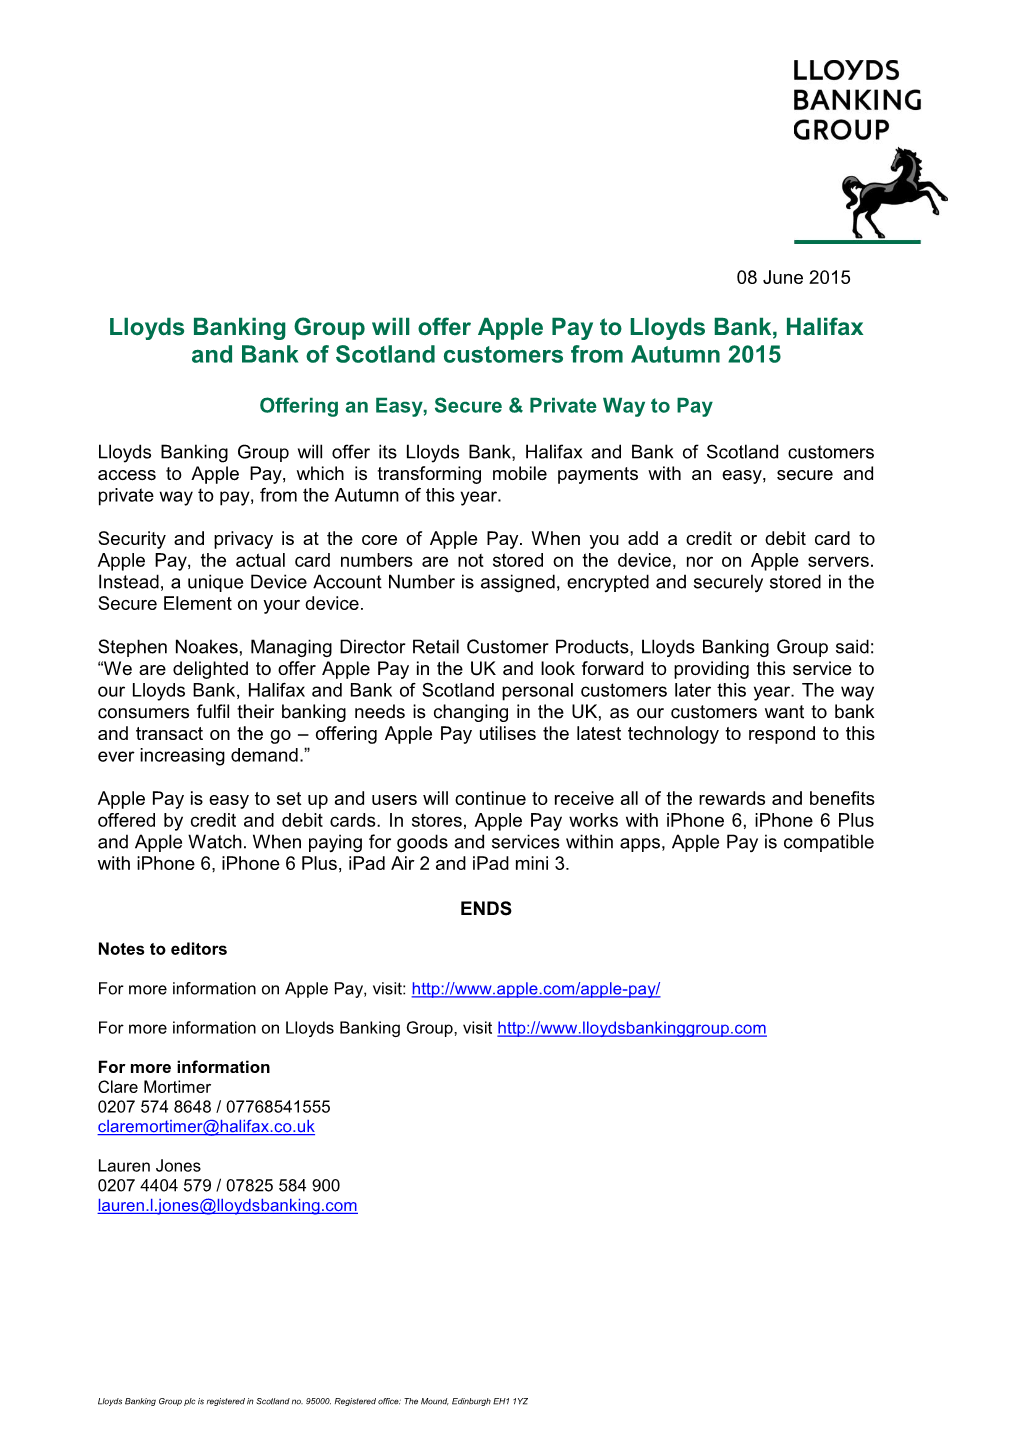 Lloyds Banking Group Will Offer Apple Pay to Lloyds Bank, Halifax and Bank of Scotland Customers from Autumn 2015